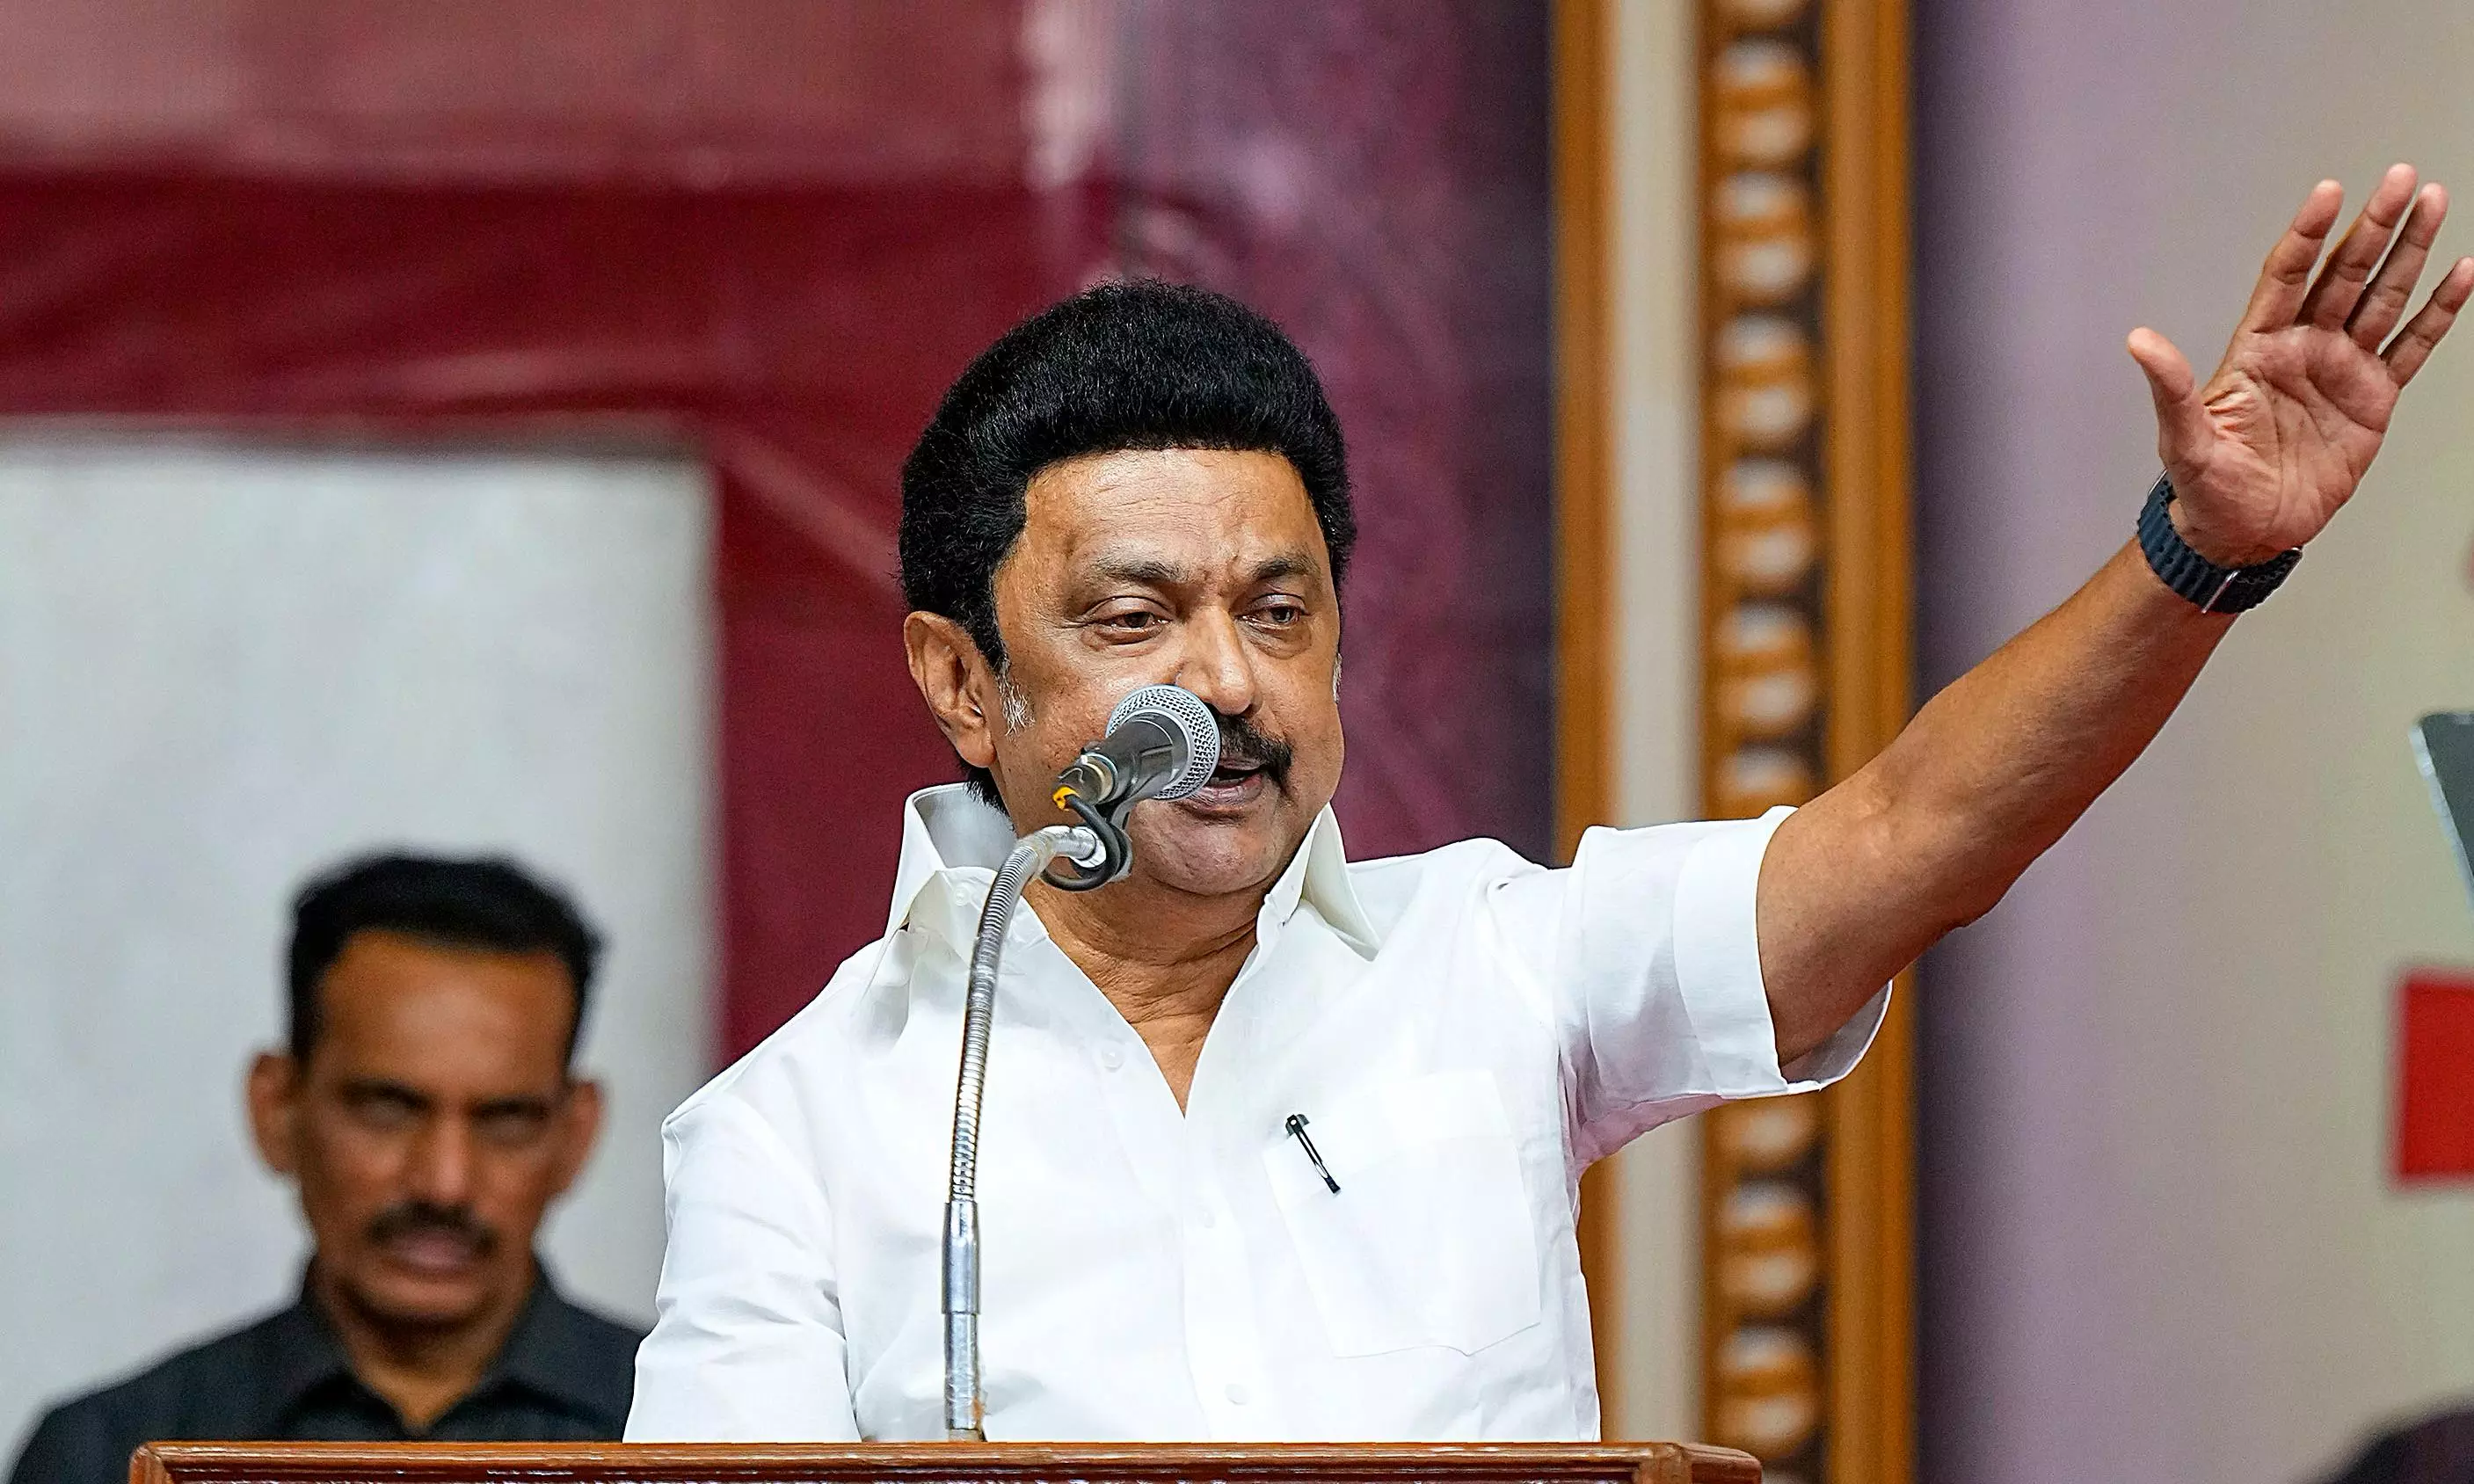 DMK says TN first state to unmask NEET, nation now realises test is fraudulent